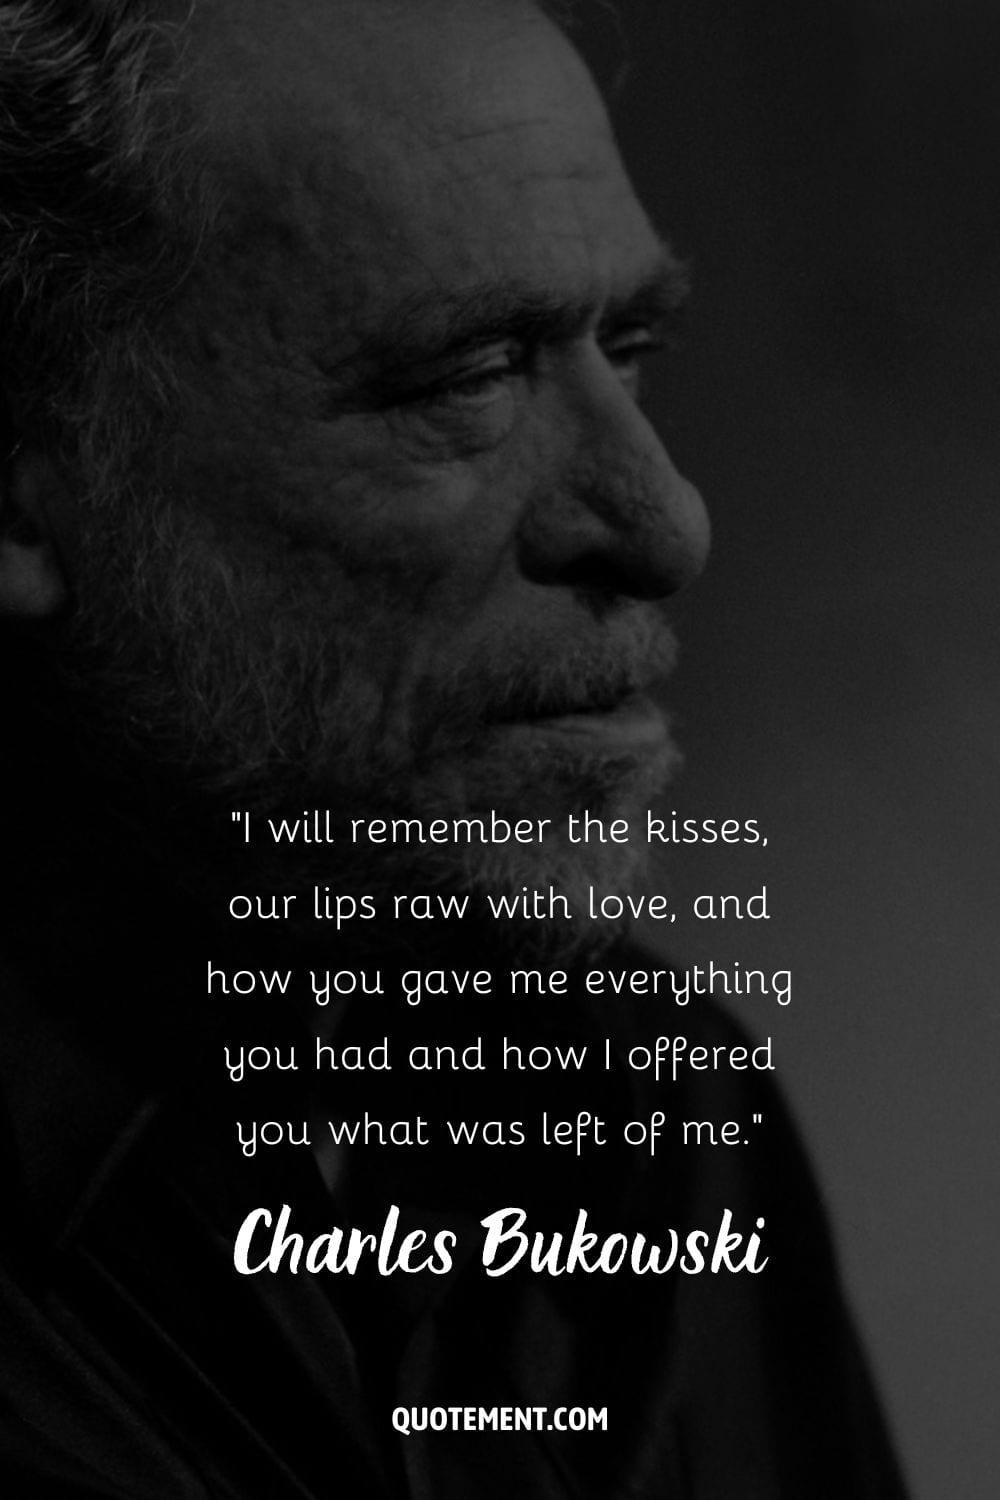 side view of author Charles Bukowski with a serious demeanor